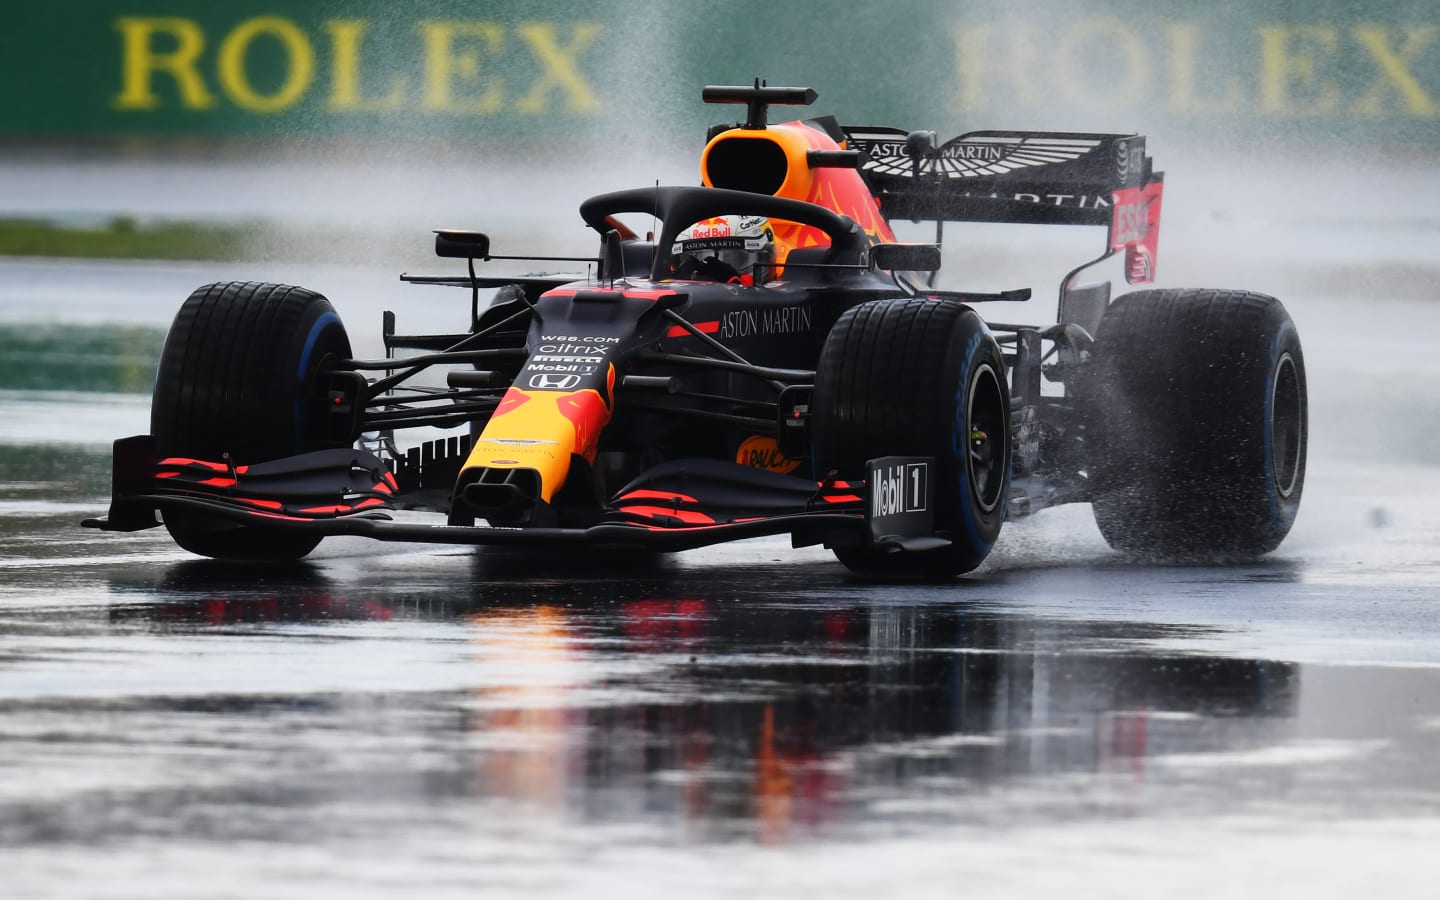 ISTANBUL, TURKEY - NOVEMBER 14: Max Verstappen of the Netherlands driving the (33) Aston Martin Red Bull Racing RB16 on track during qualifying ahead of the F1 Grand Prix of Turkey at Intercity Istanbul Park on November 14, 2020 in Istanbul, Turkey. (Photo by Clive Mason/Getty Images)